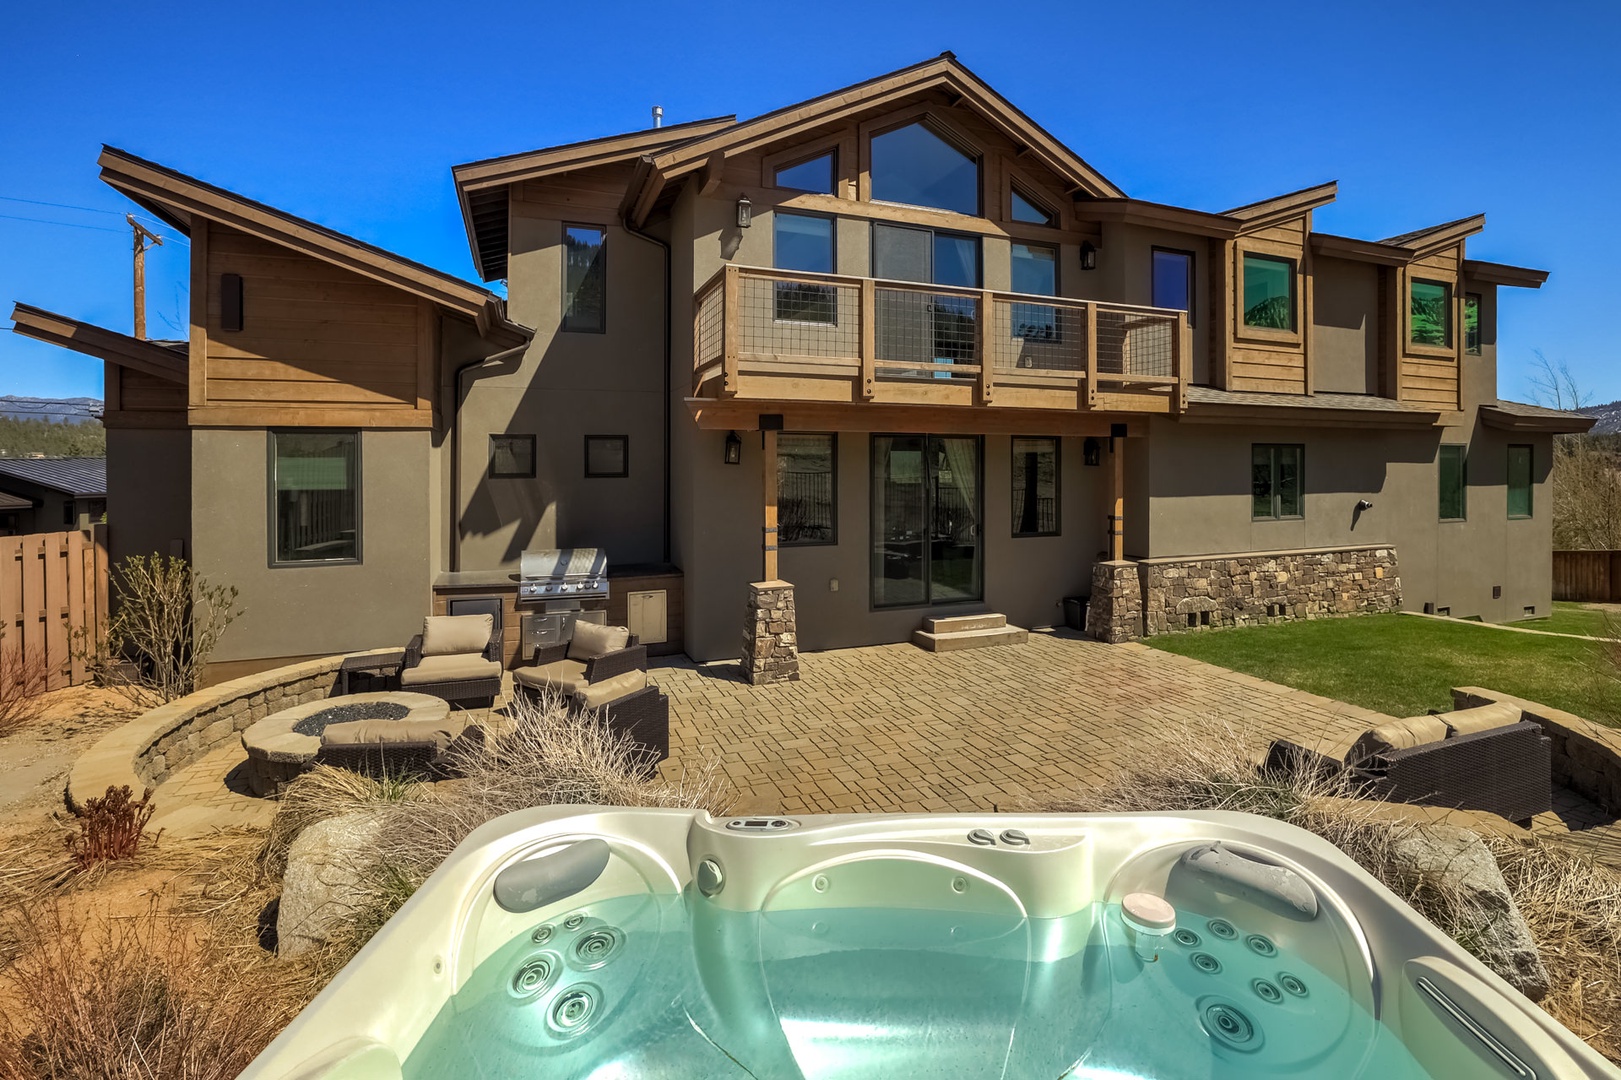 Soak in the views while in the hot tub accessible year round